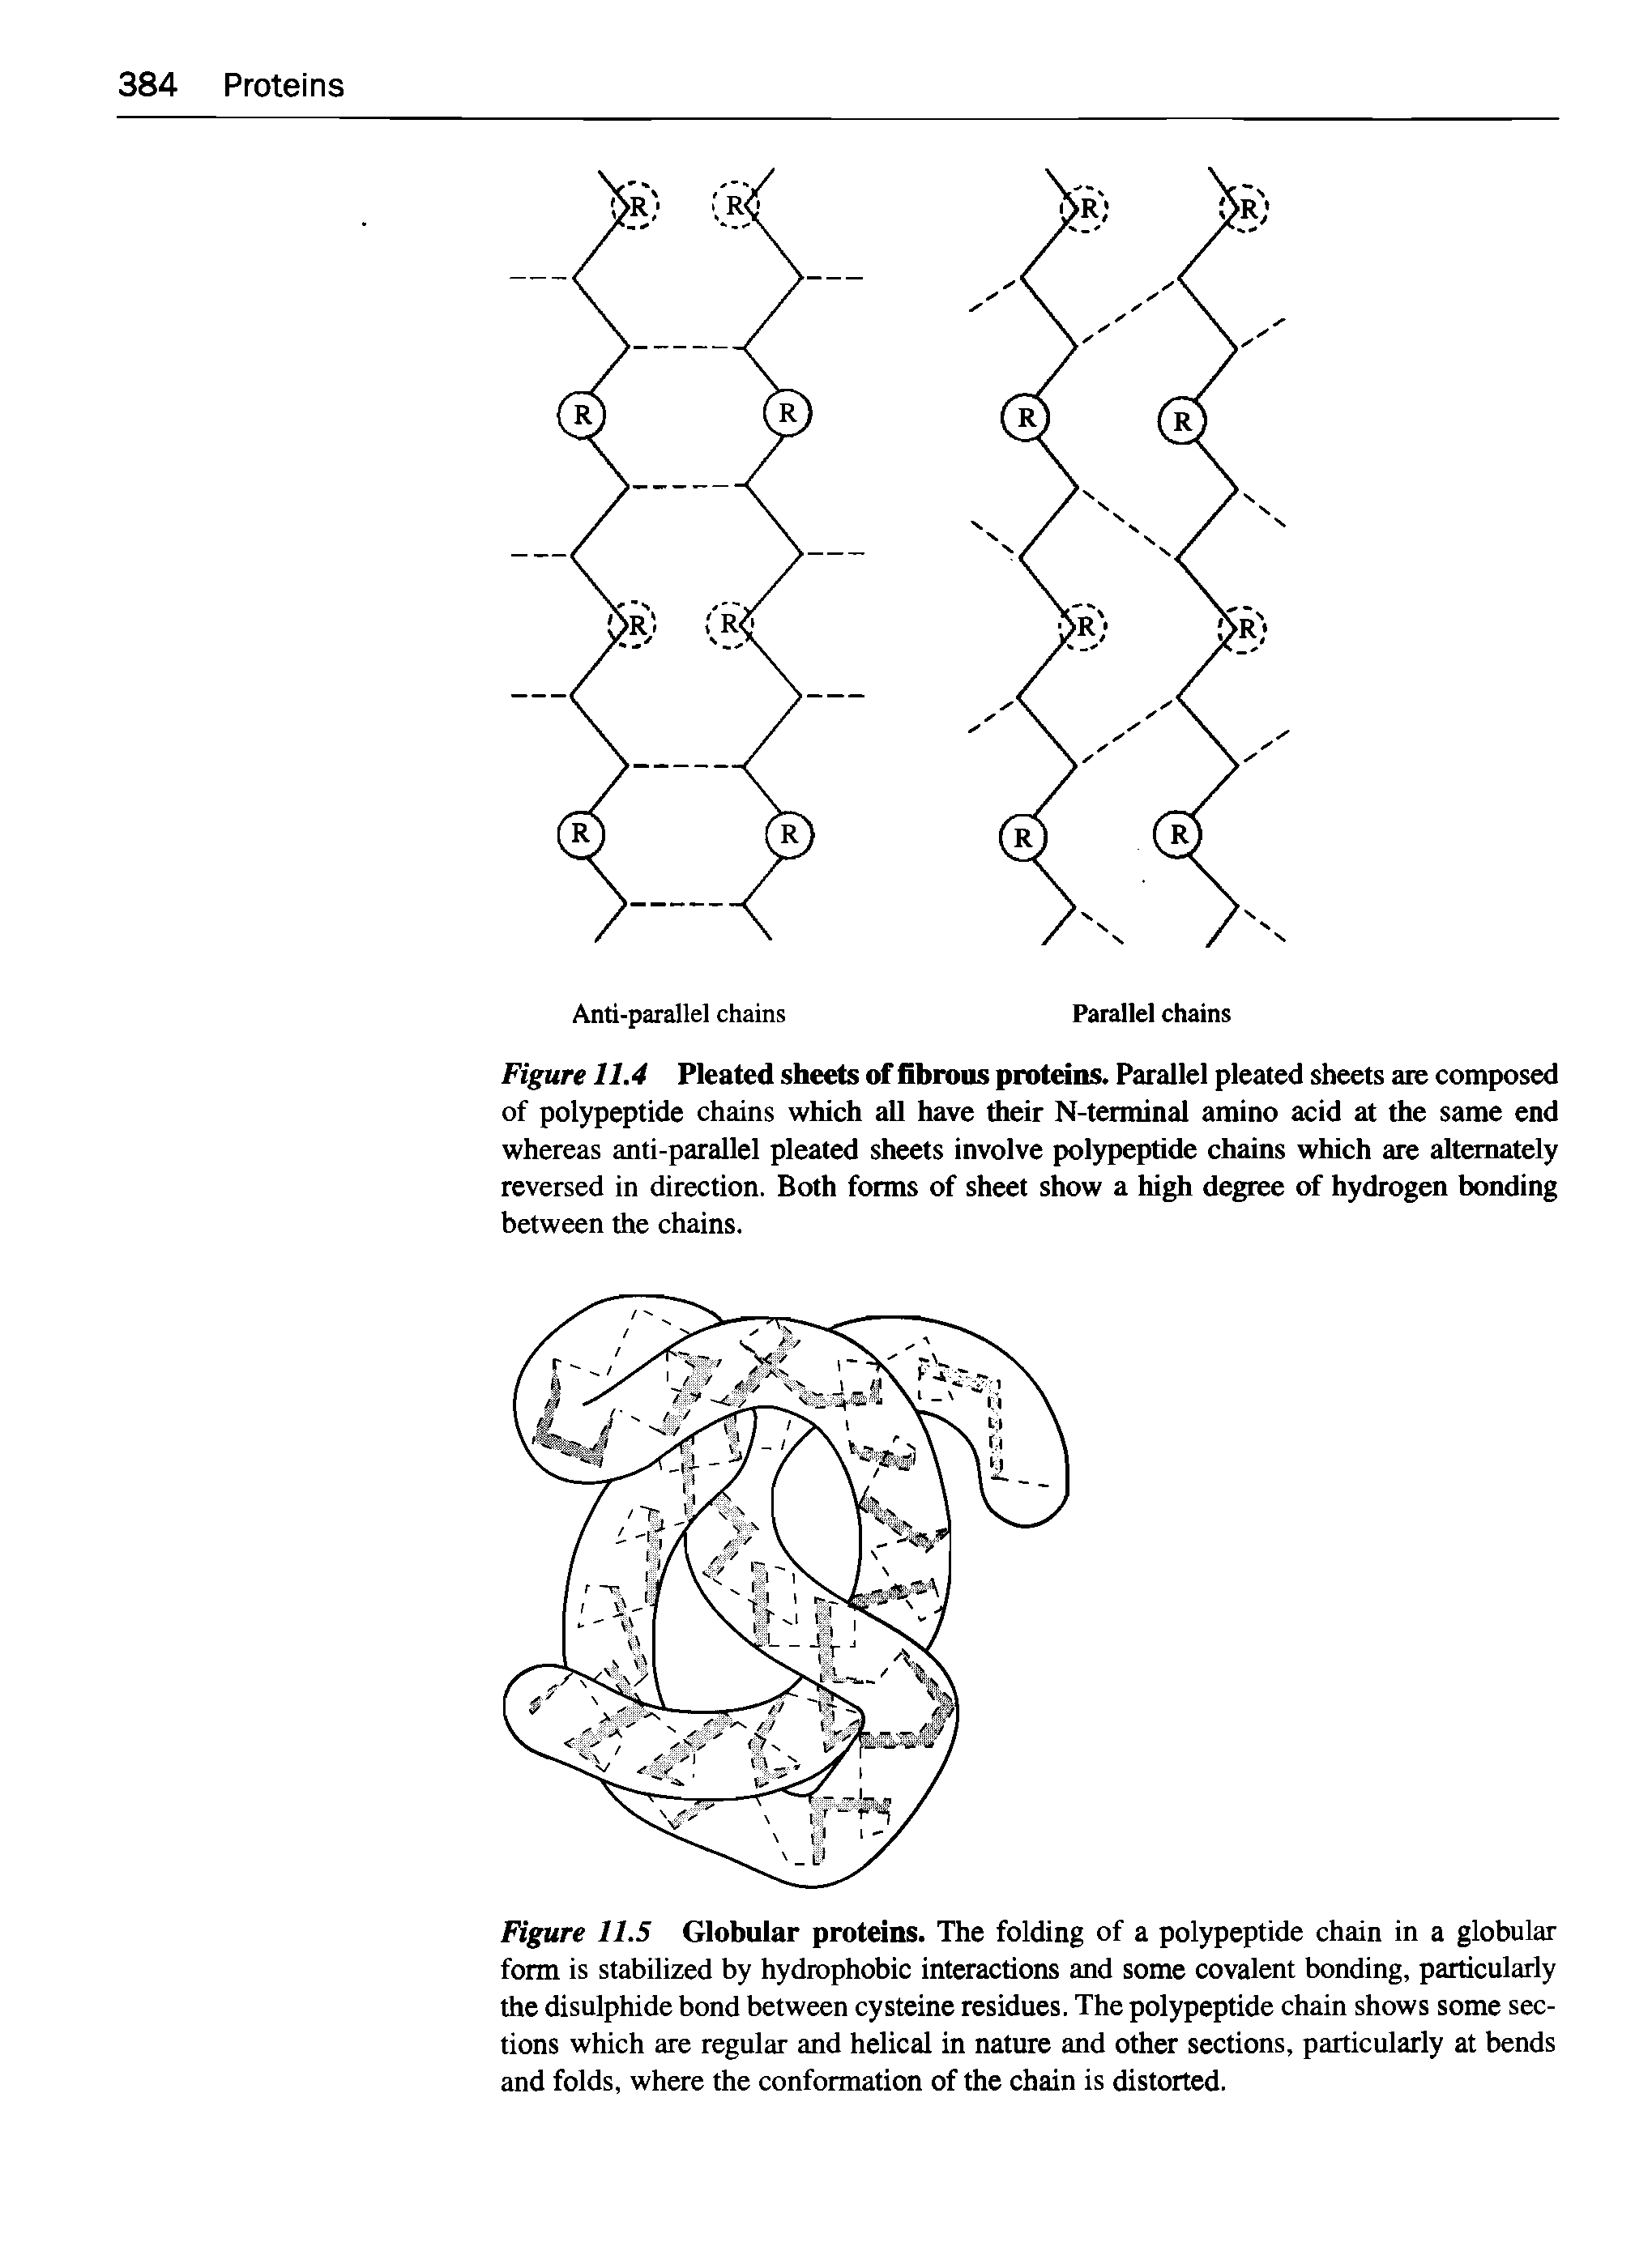 Figure 11.4 Pleated sheets of fibrous proteins. Parallel pleated sheets are composed of polypeptide chains which all have their N-terminal amino acid at the same end whereas anti-parallel pleated sheets involve polypeptide chains which are alternately reversed in direction. Both forms of sheet show a high degree of hydrogen bonding between the chains.